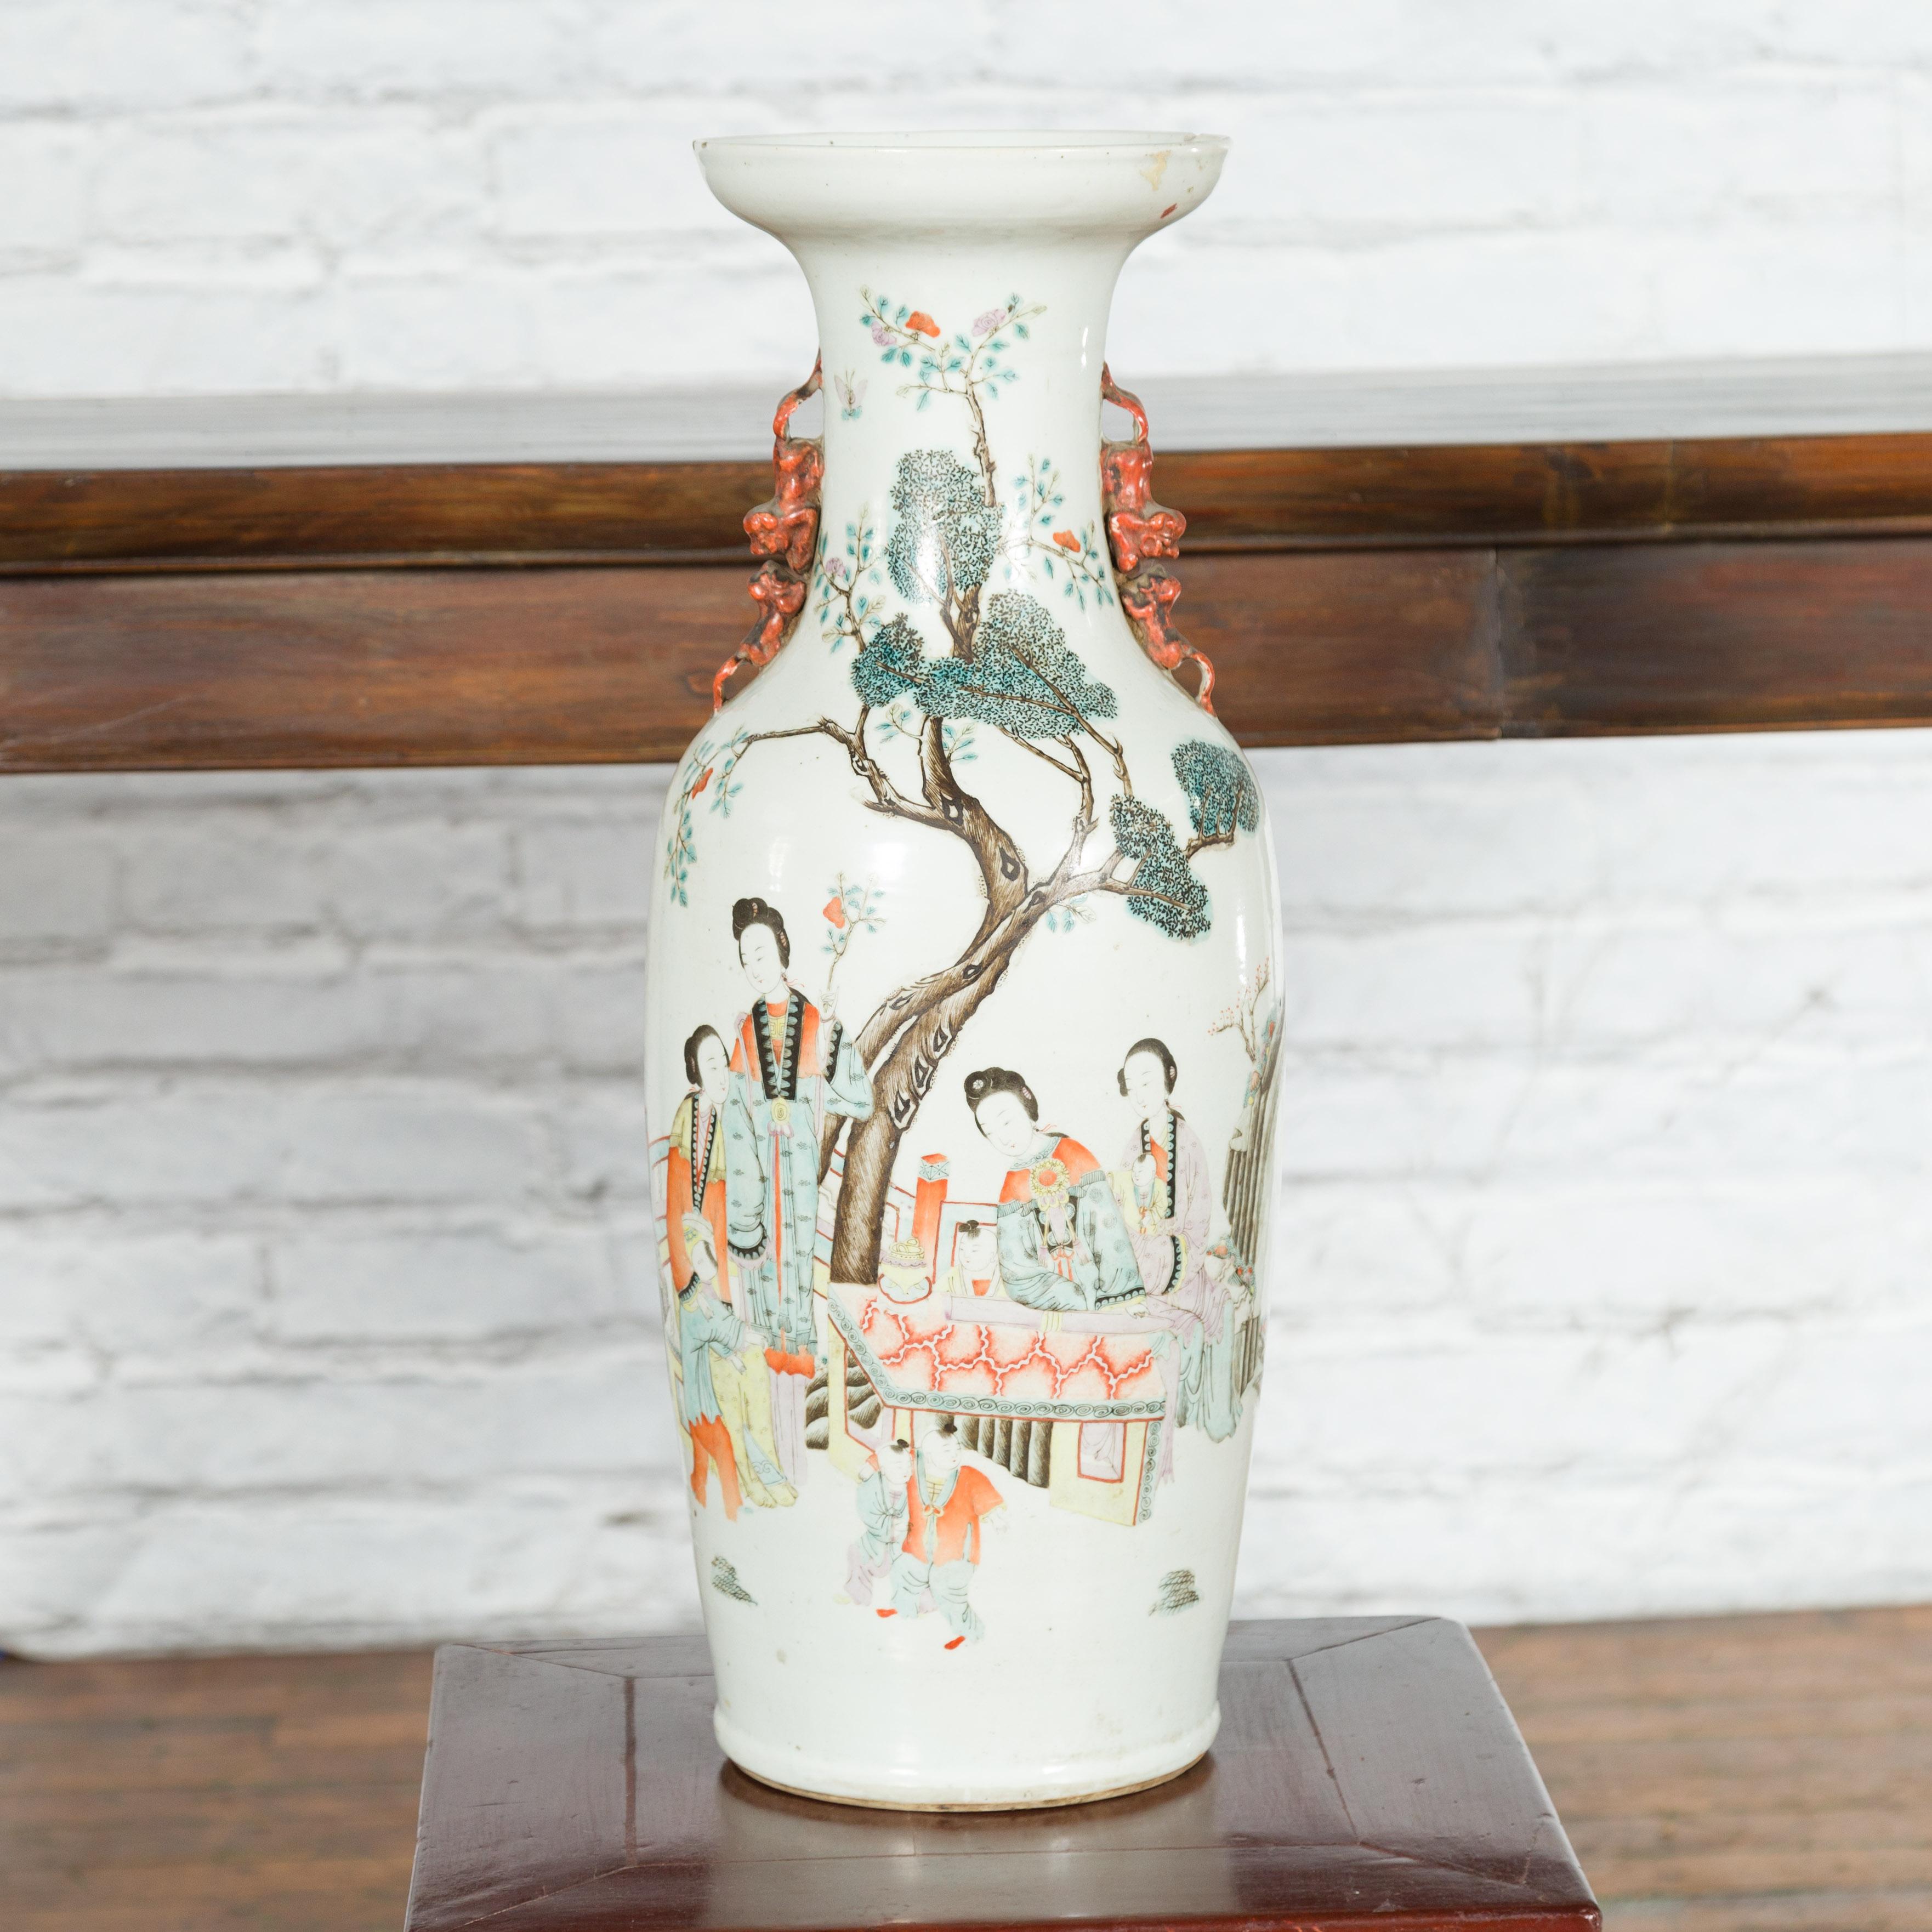 A Chinese Qing Dynasty period porcelain altar vase from the 19th century with hand-painted figures and calligraphy décor. Created in China during the Qing Dynasty period in the 19th century, this porcelain altar vase features a nicely flaring neck